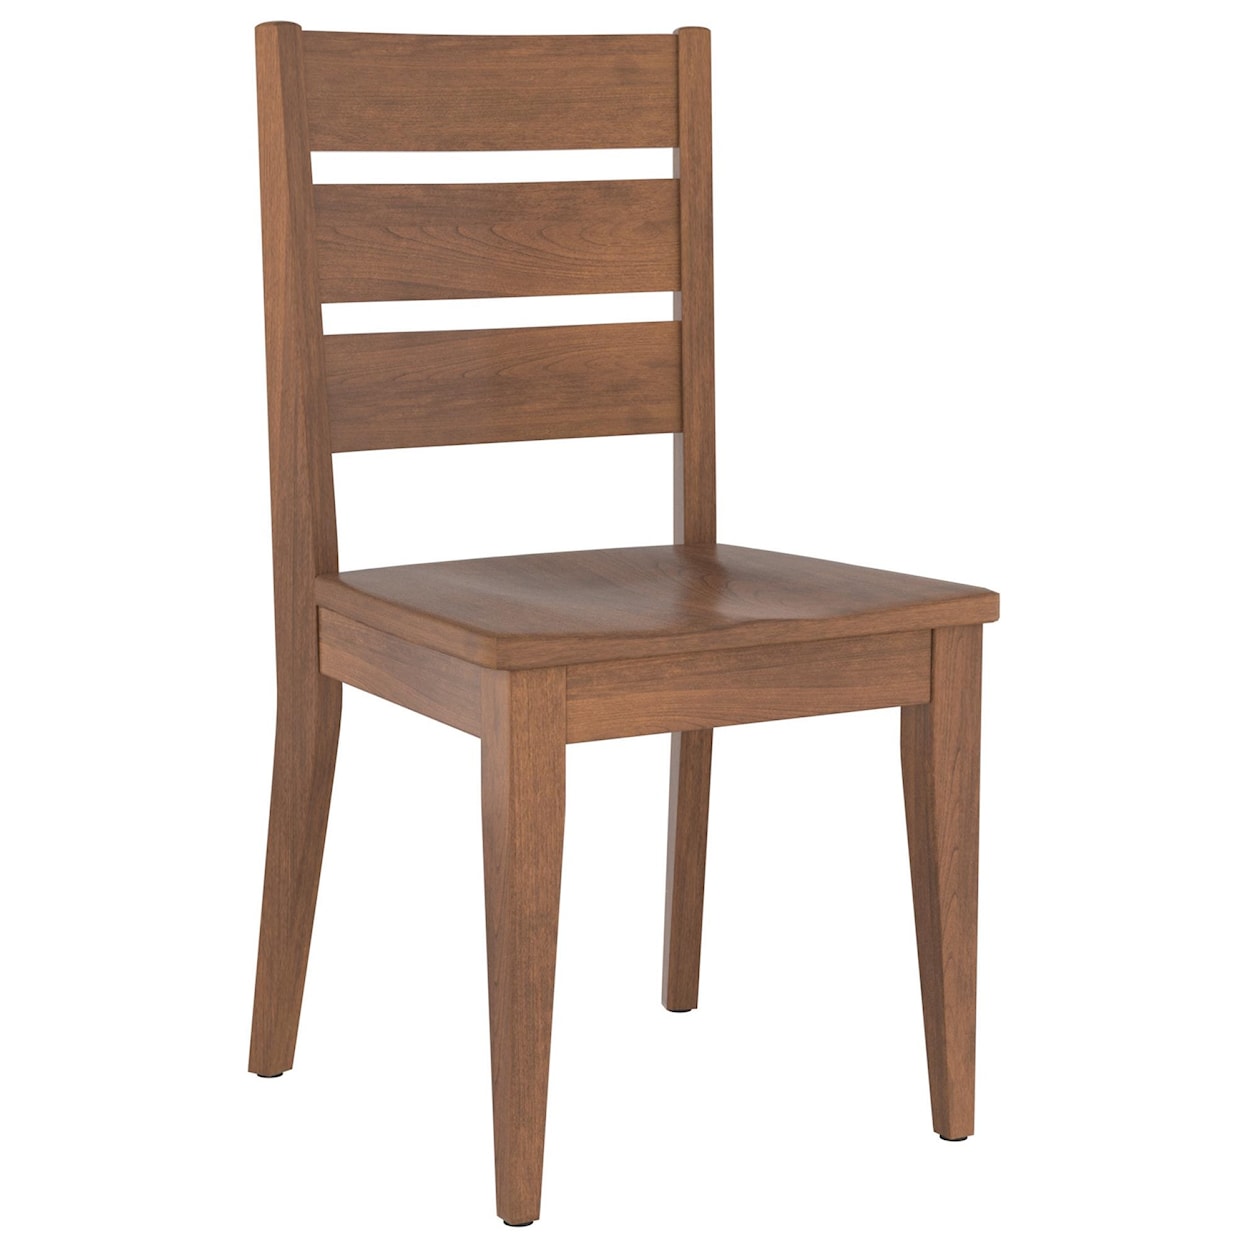 Wengerd Wood Products Winston Side Chair